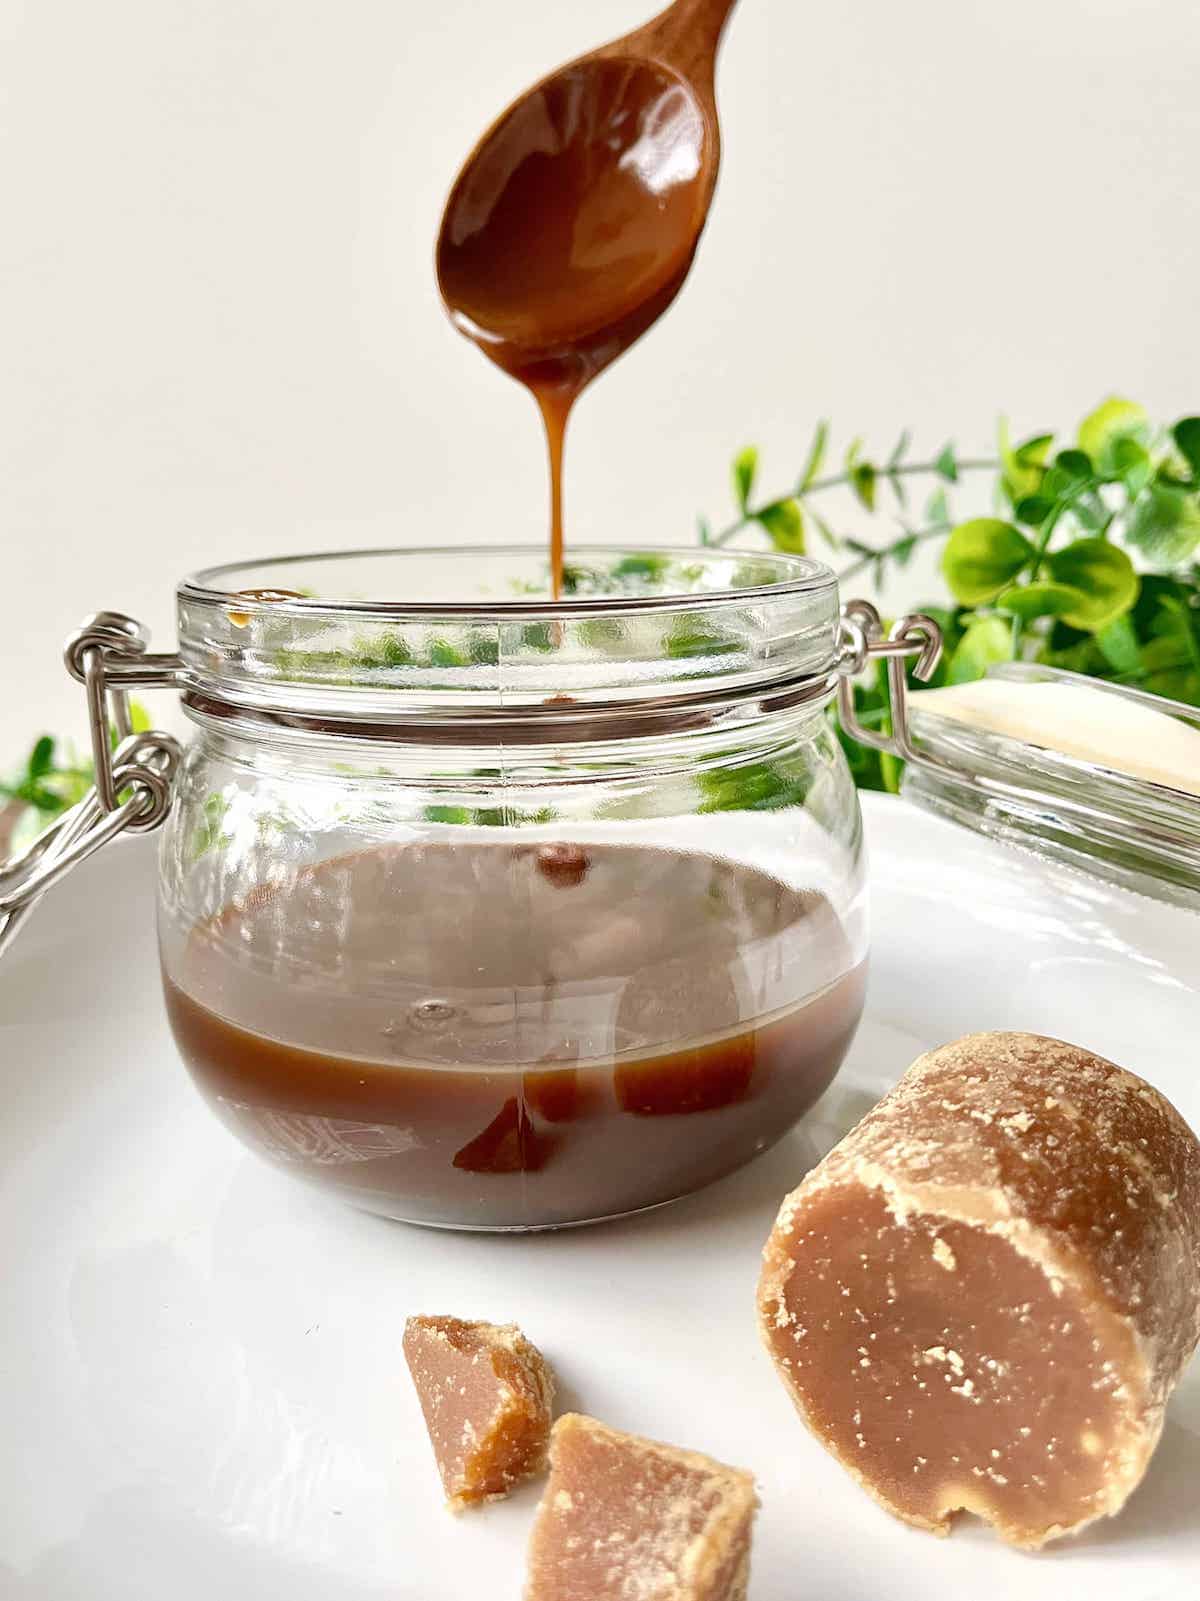 A wooden spoon scooping coconut caramel sauce out of a jar next to Gula Melaka Palm Sugar.